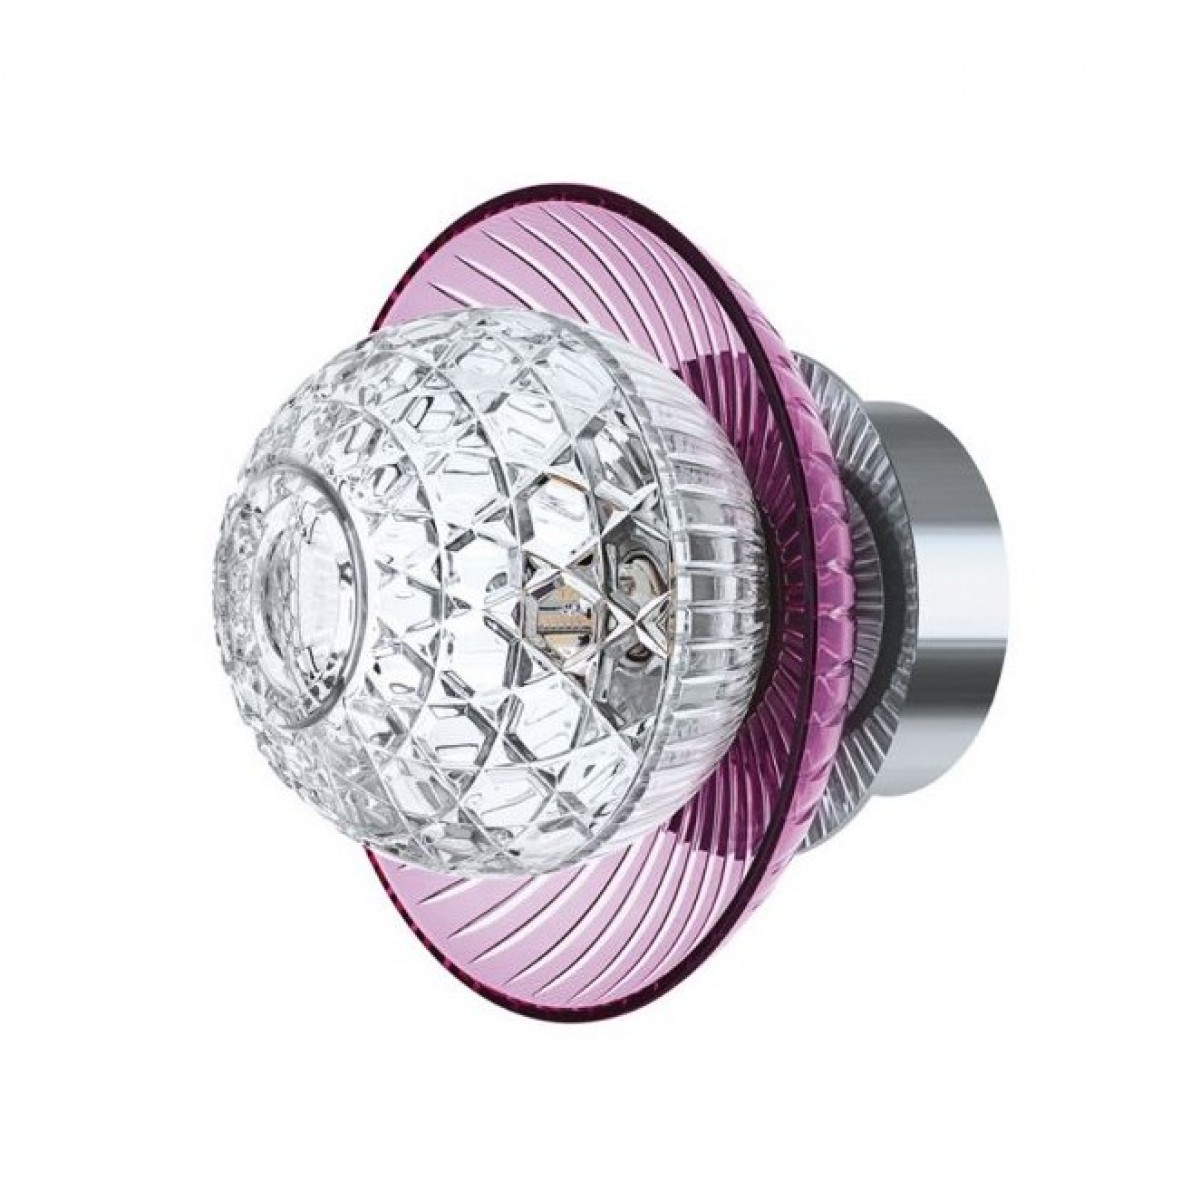 Royal Amethyst Cup Small Sconce, IP44 - Polished Stainless Steel